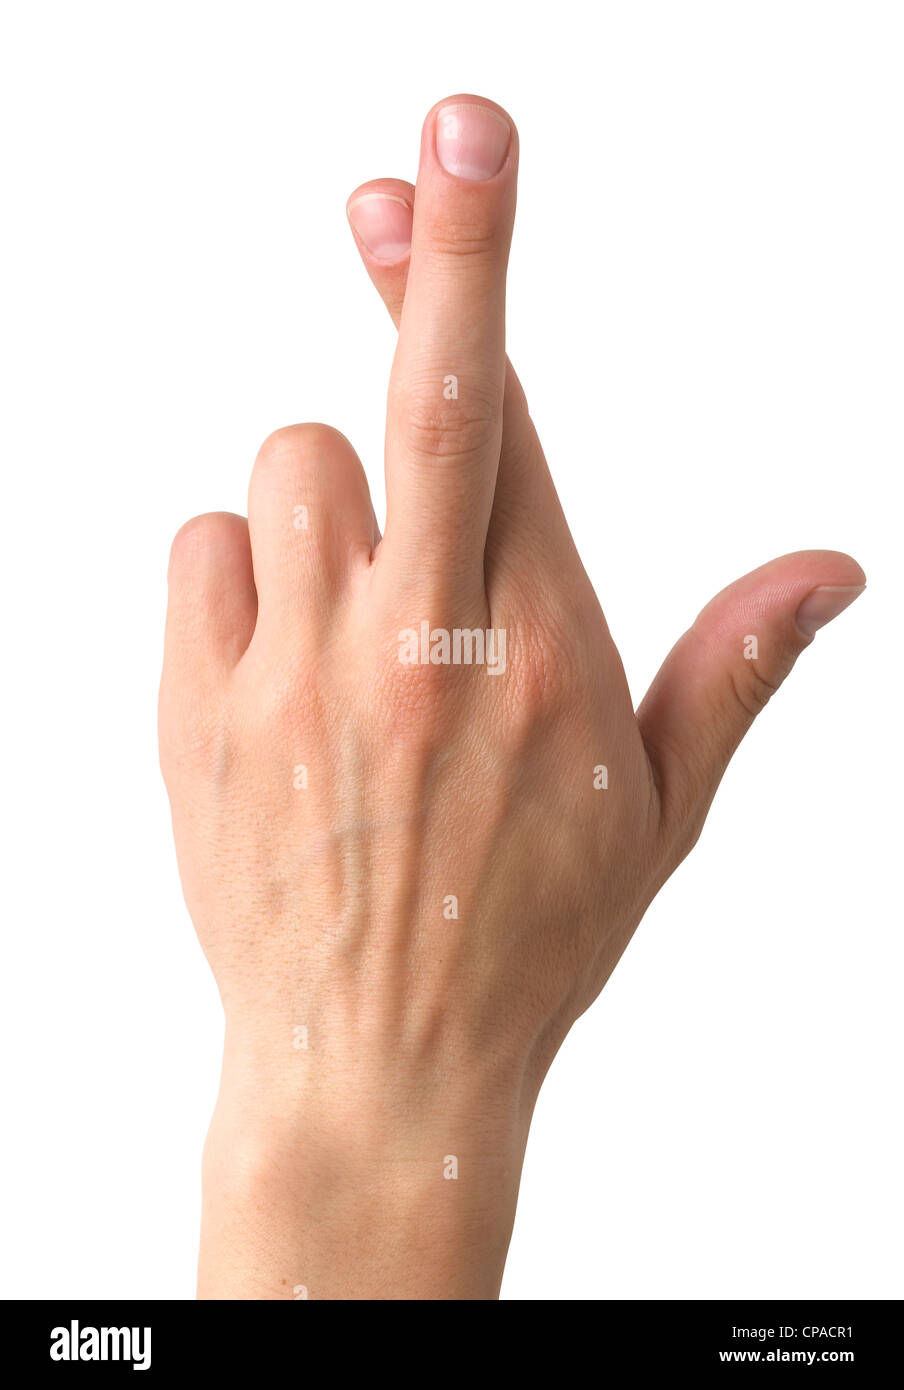 a gesturing good luck symbol fingers crossed human hand on white clipping path Stock Photo